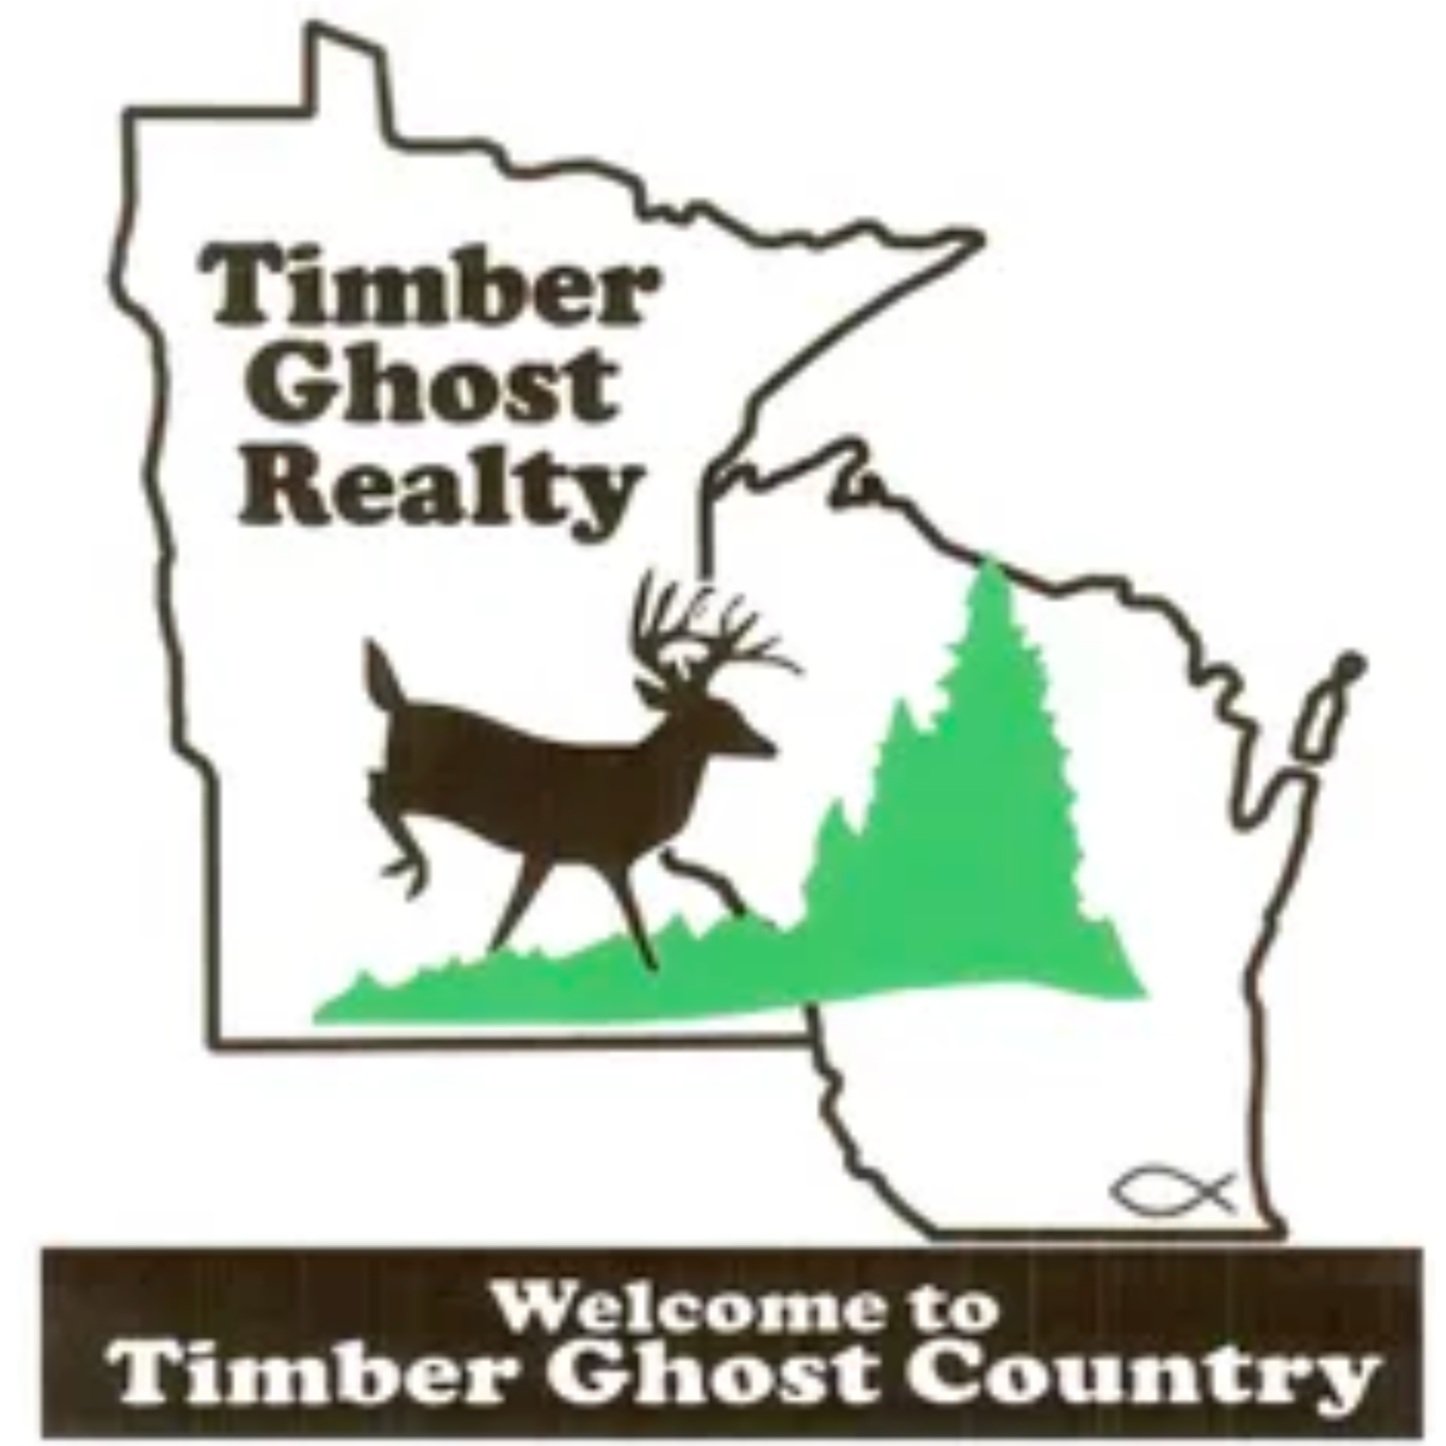 Timber Ghost Realty Duluth